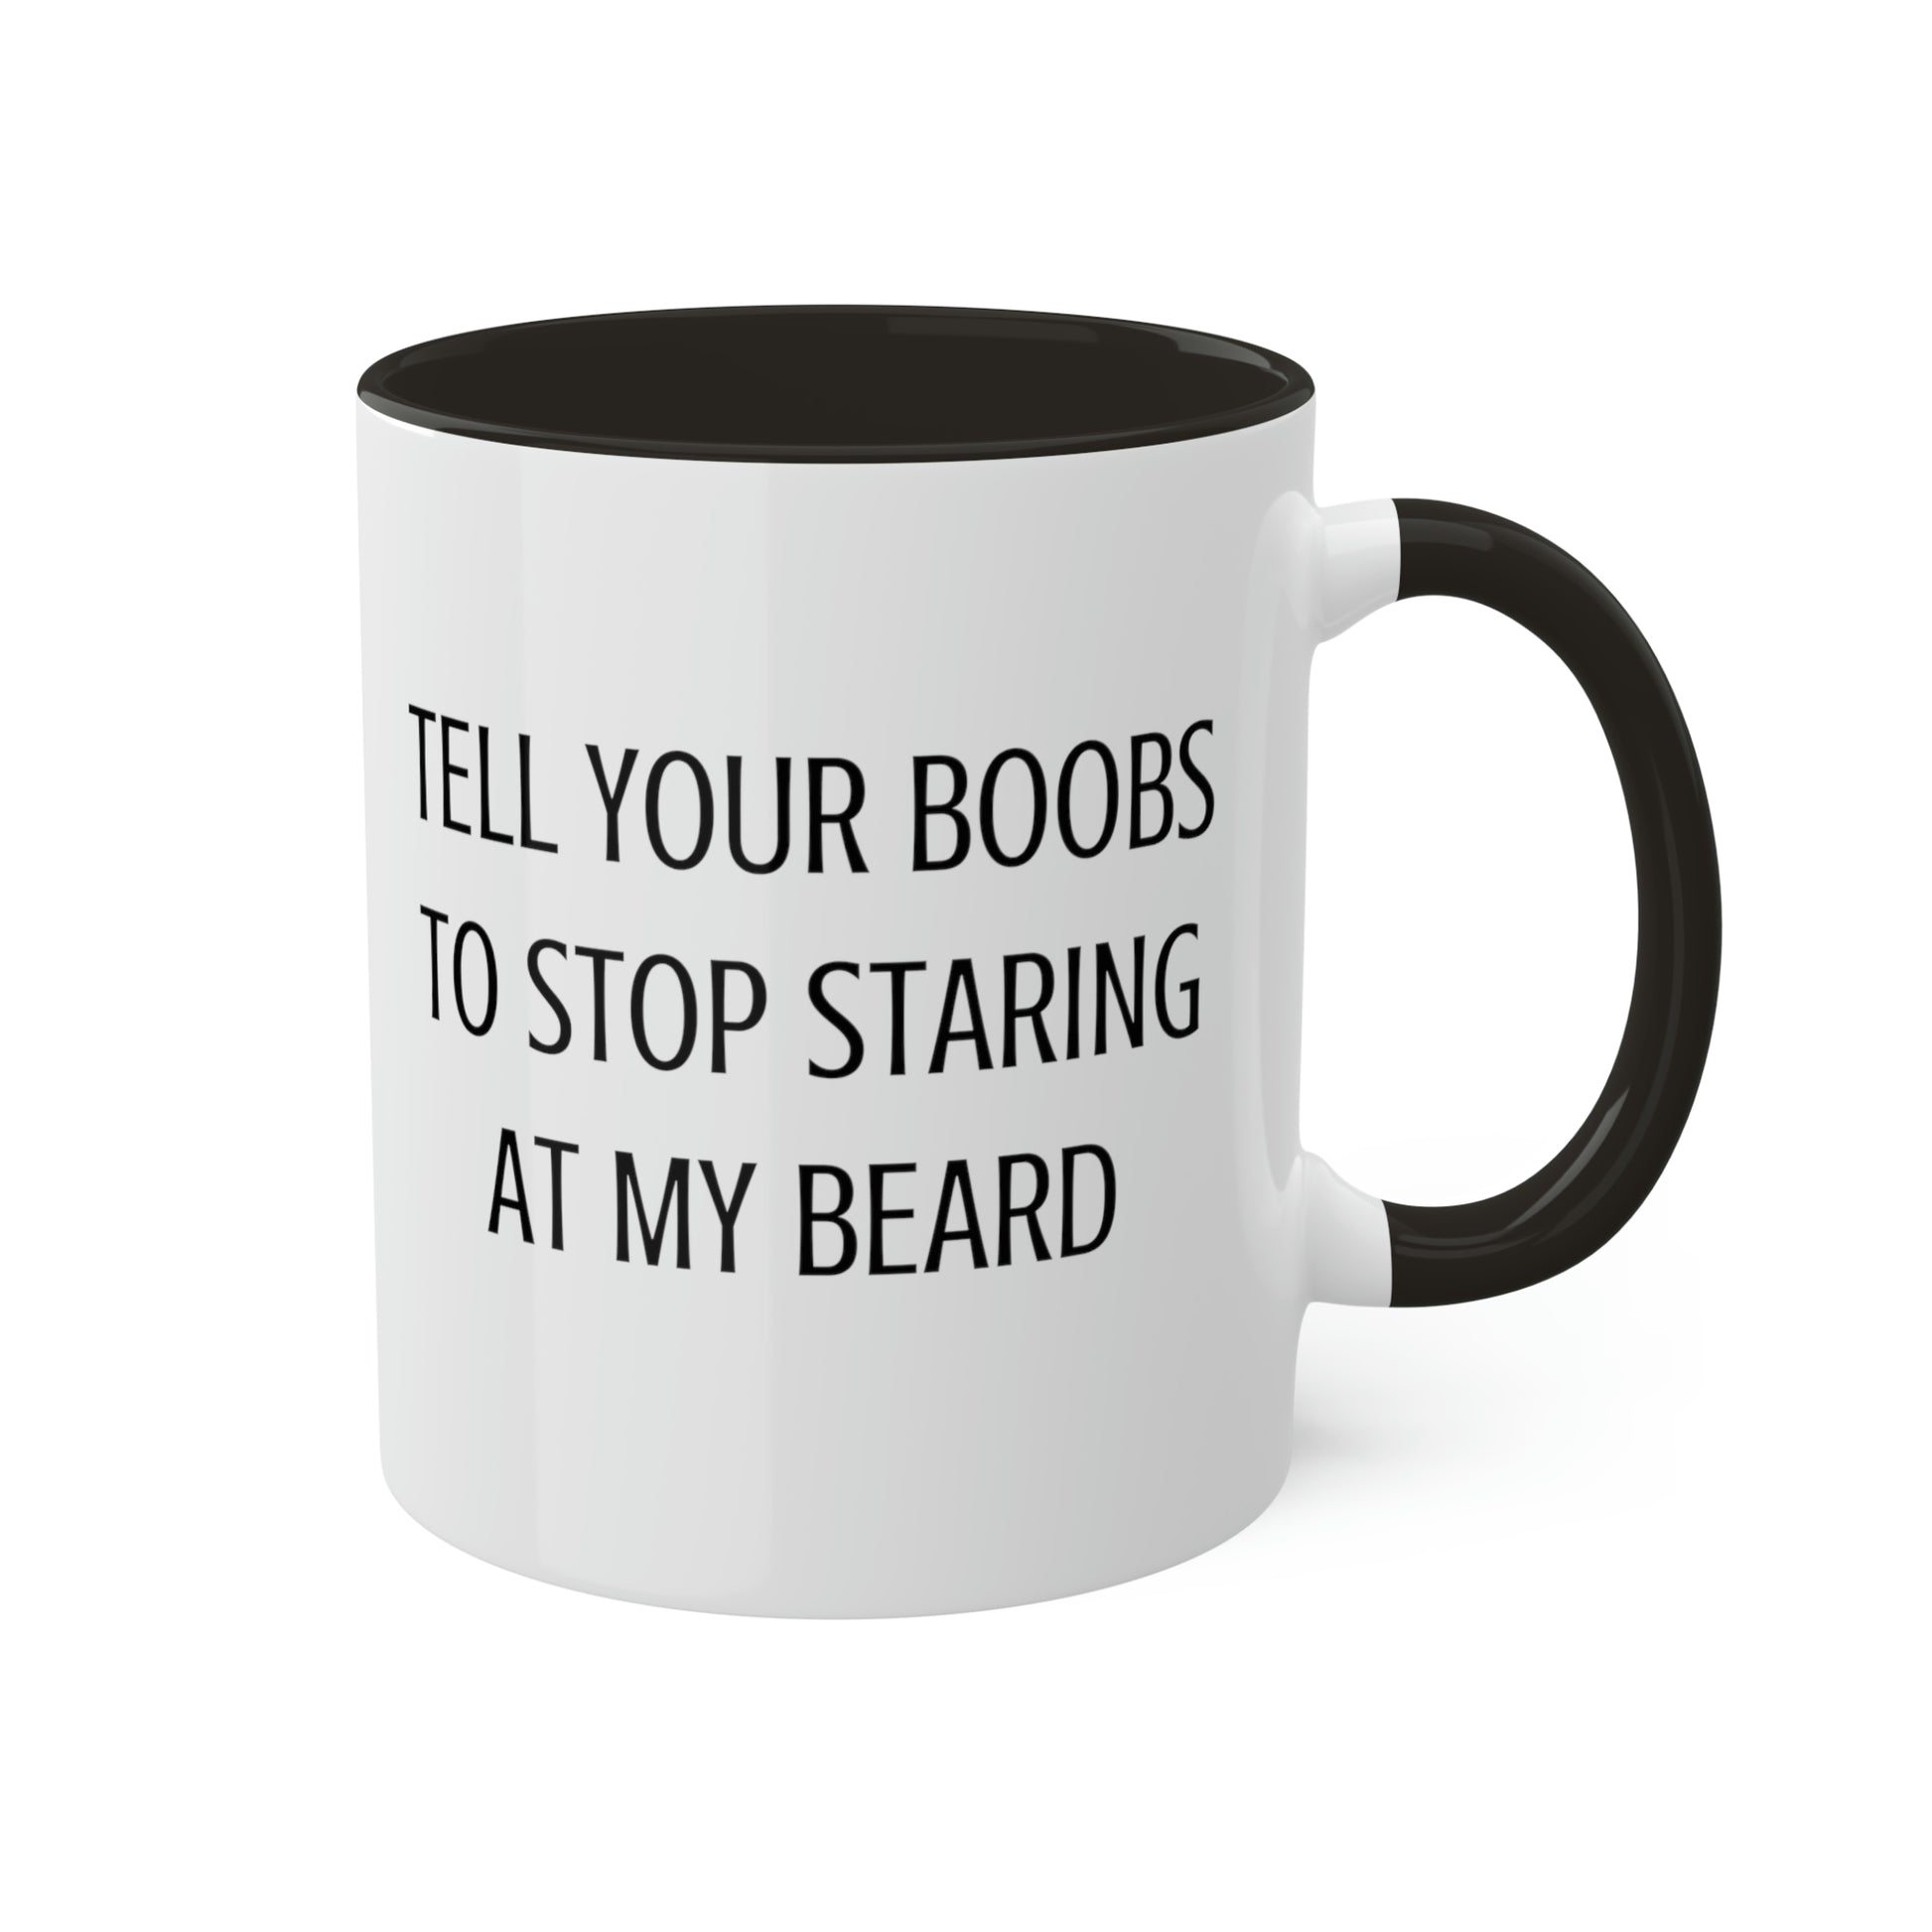 tell-your-boobs-to-stop-staring-at-my-beard-glossy-mug-11-oz-coffee-funny-right-side